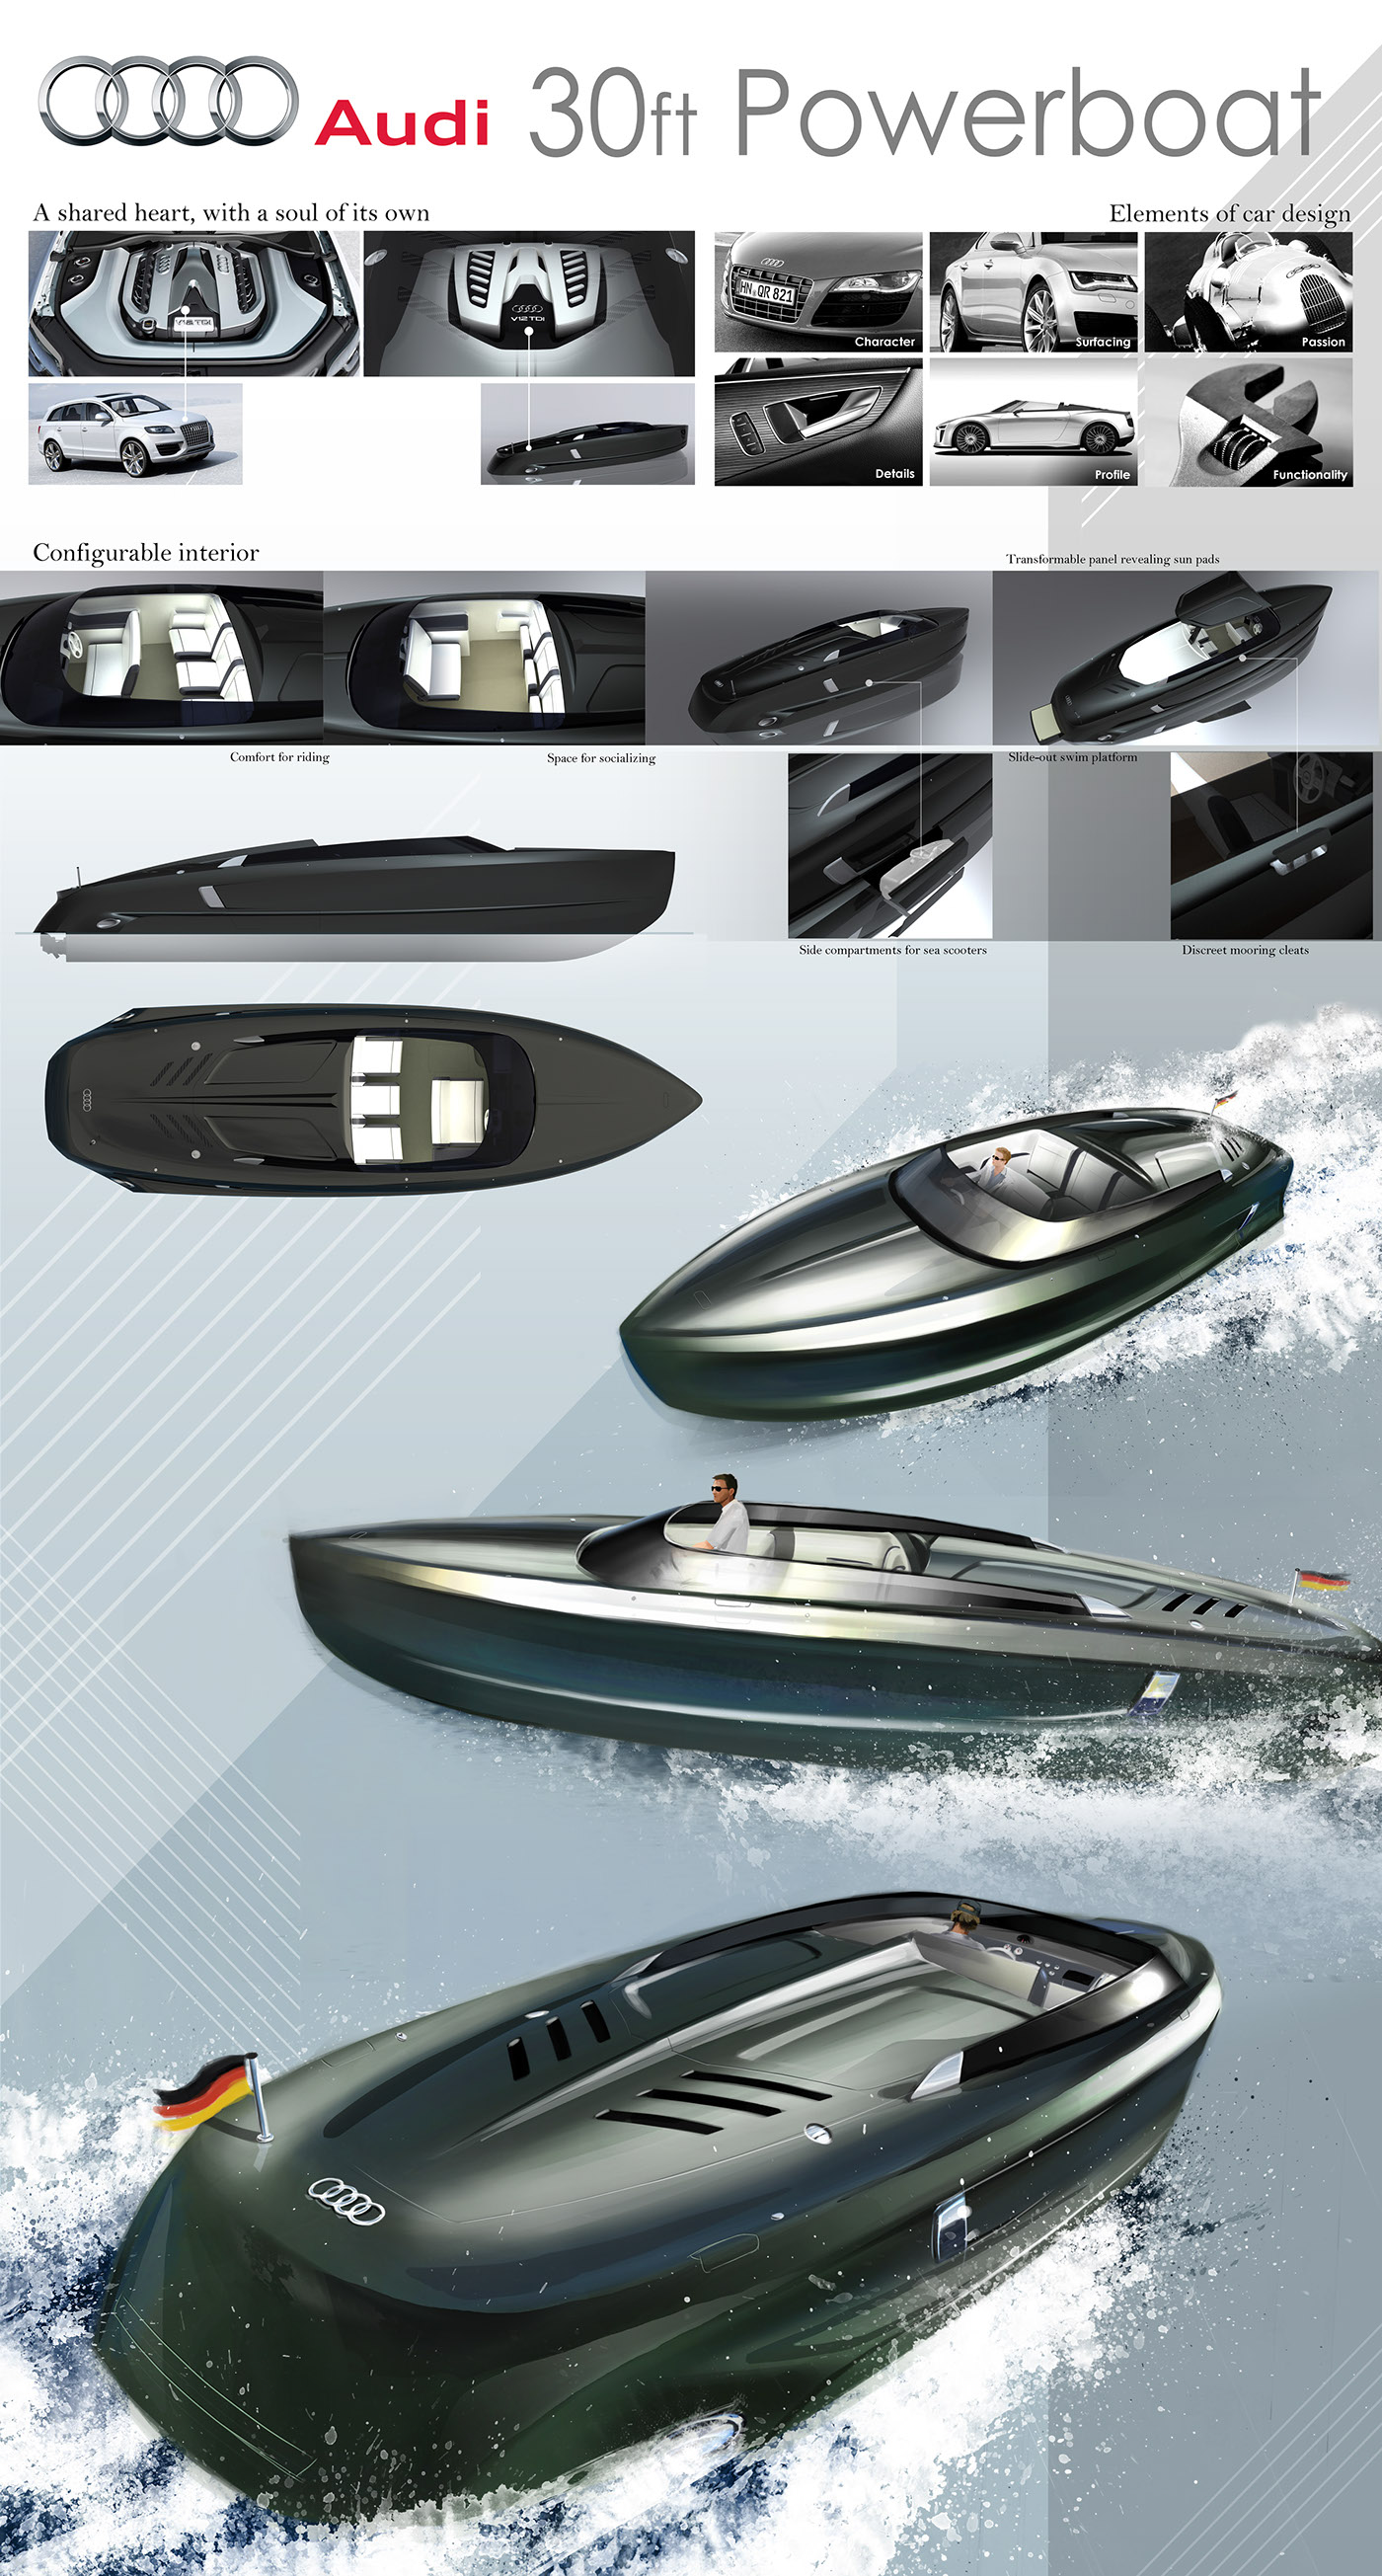 yacht boat Powerboat offshore Yacht Design transportation